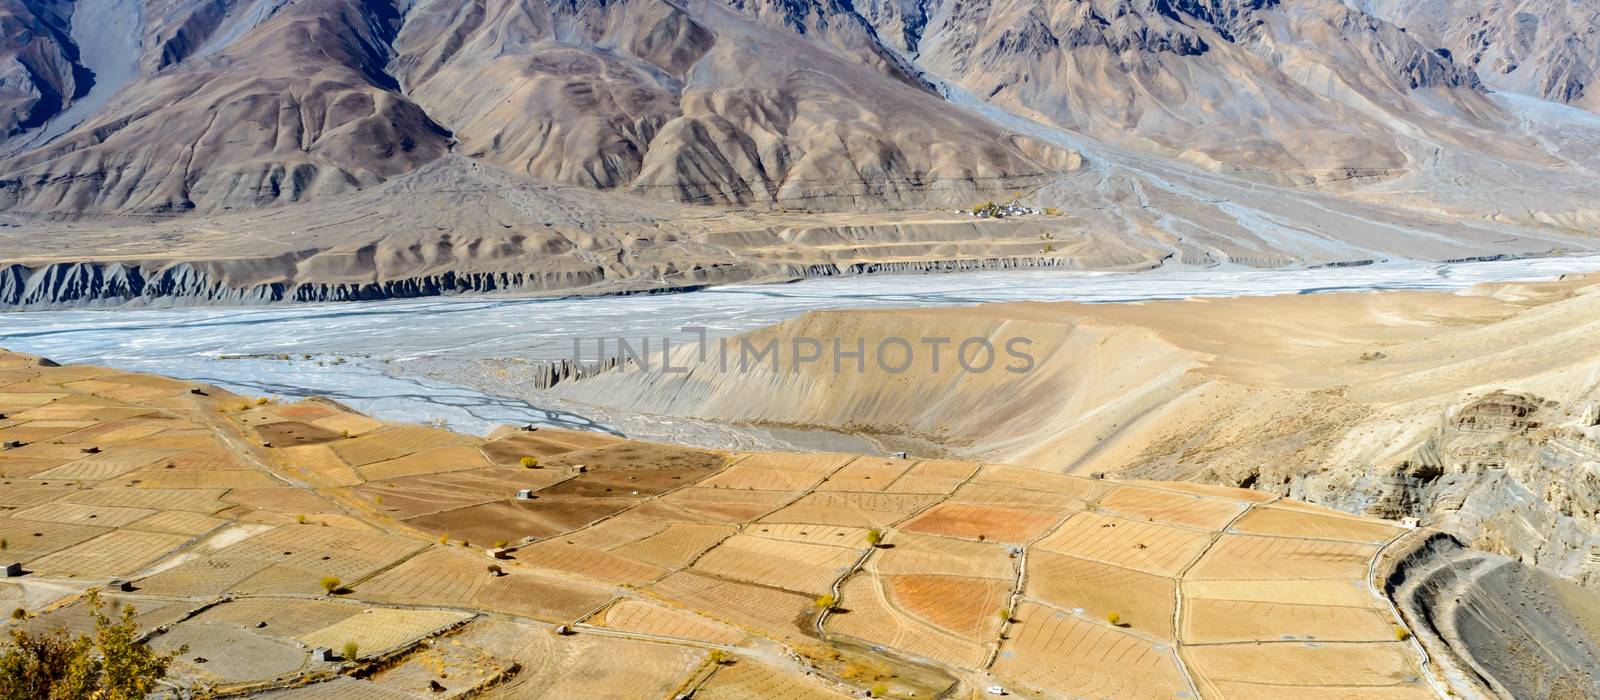 Barren Landscape panorama. Rice Terraces Cultivation field and agricultural farm land deep slope of Himalaya mountain Valley. Spiti river in background. Kaza town, Himachal Pradesh Hill State India. Aerial view by sudiptabhowmick